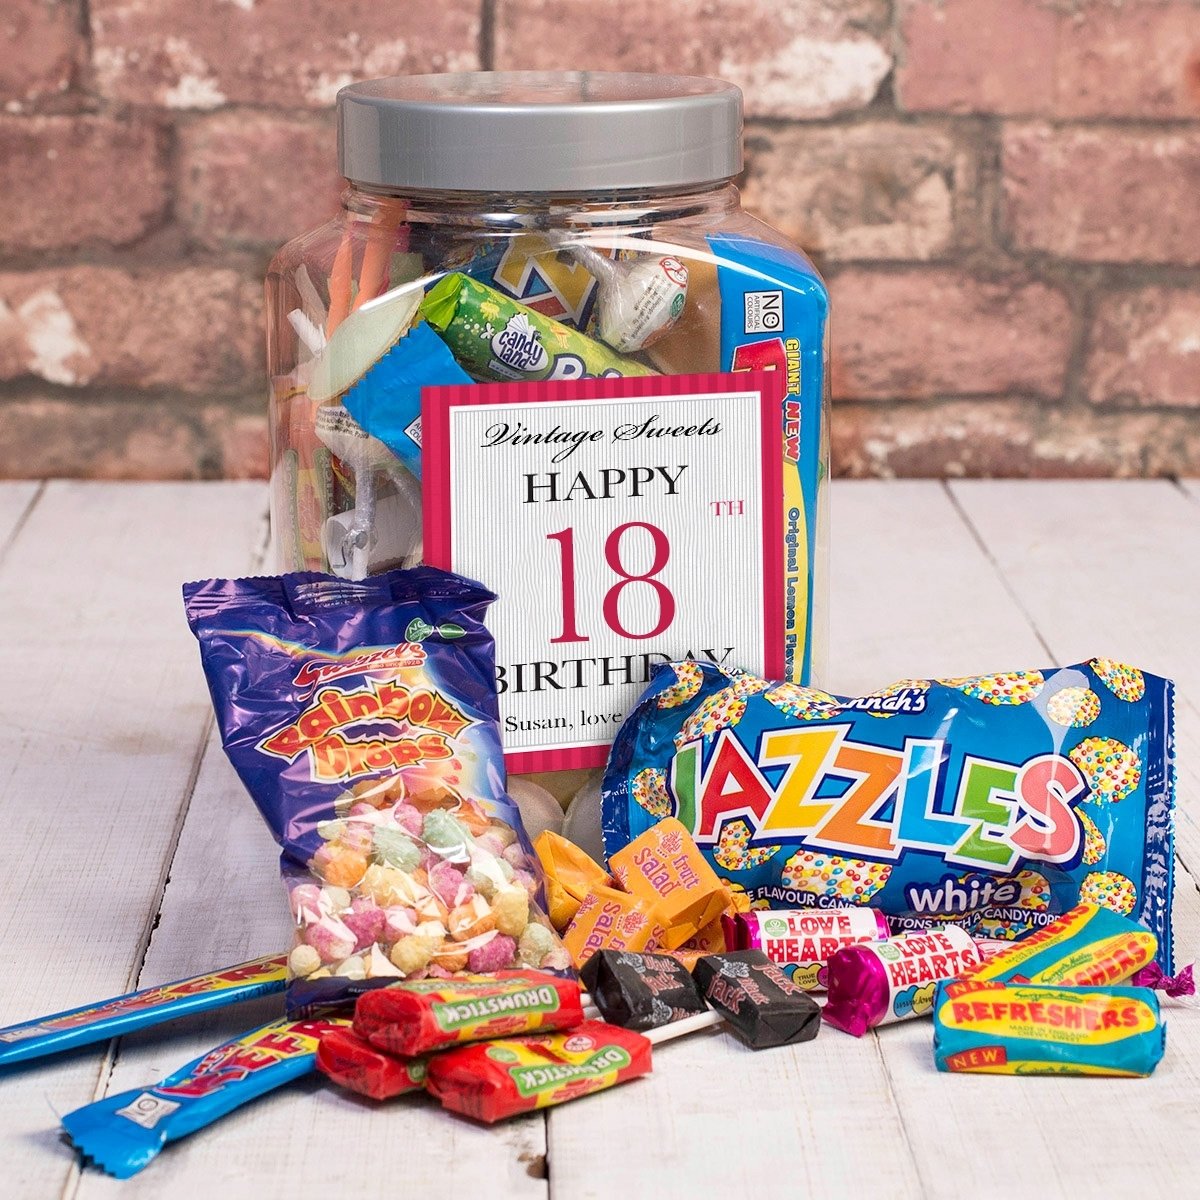 10 Stylish Gift Ideas For 18Th Birthday 18th birthday gifts ideas gettingpersonal co uk 1 2022